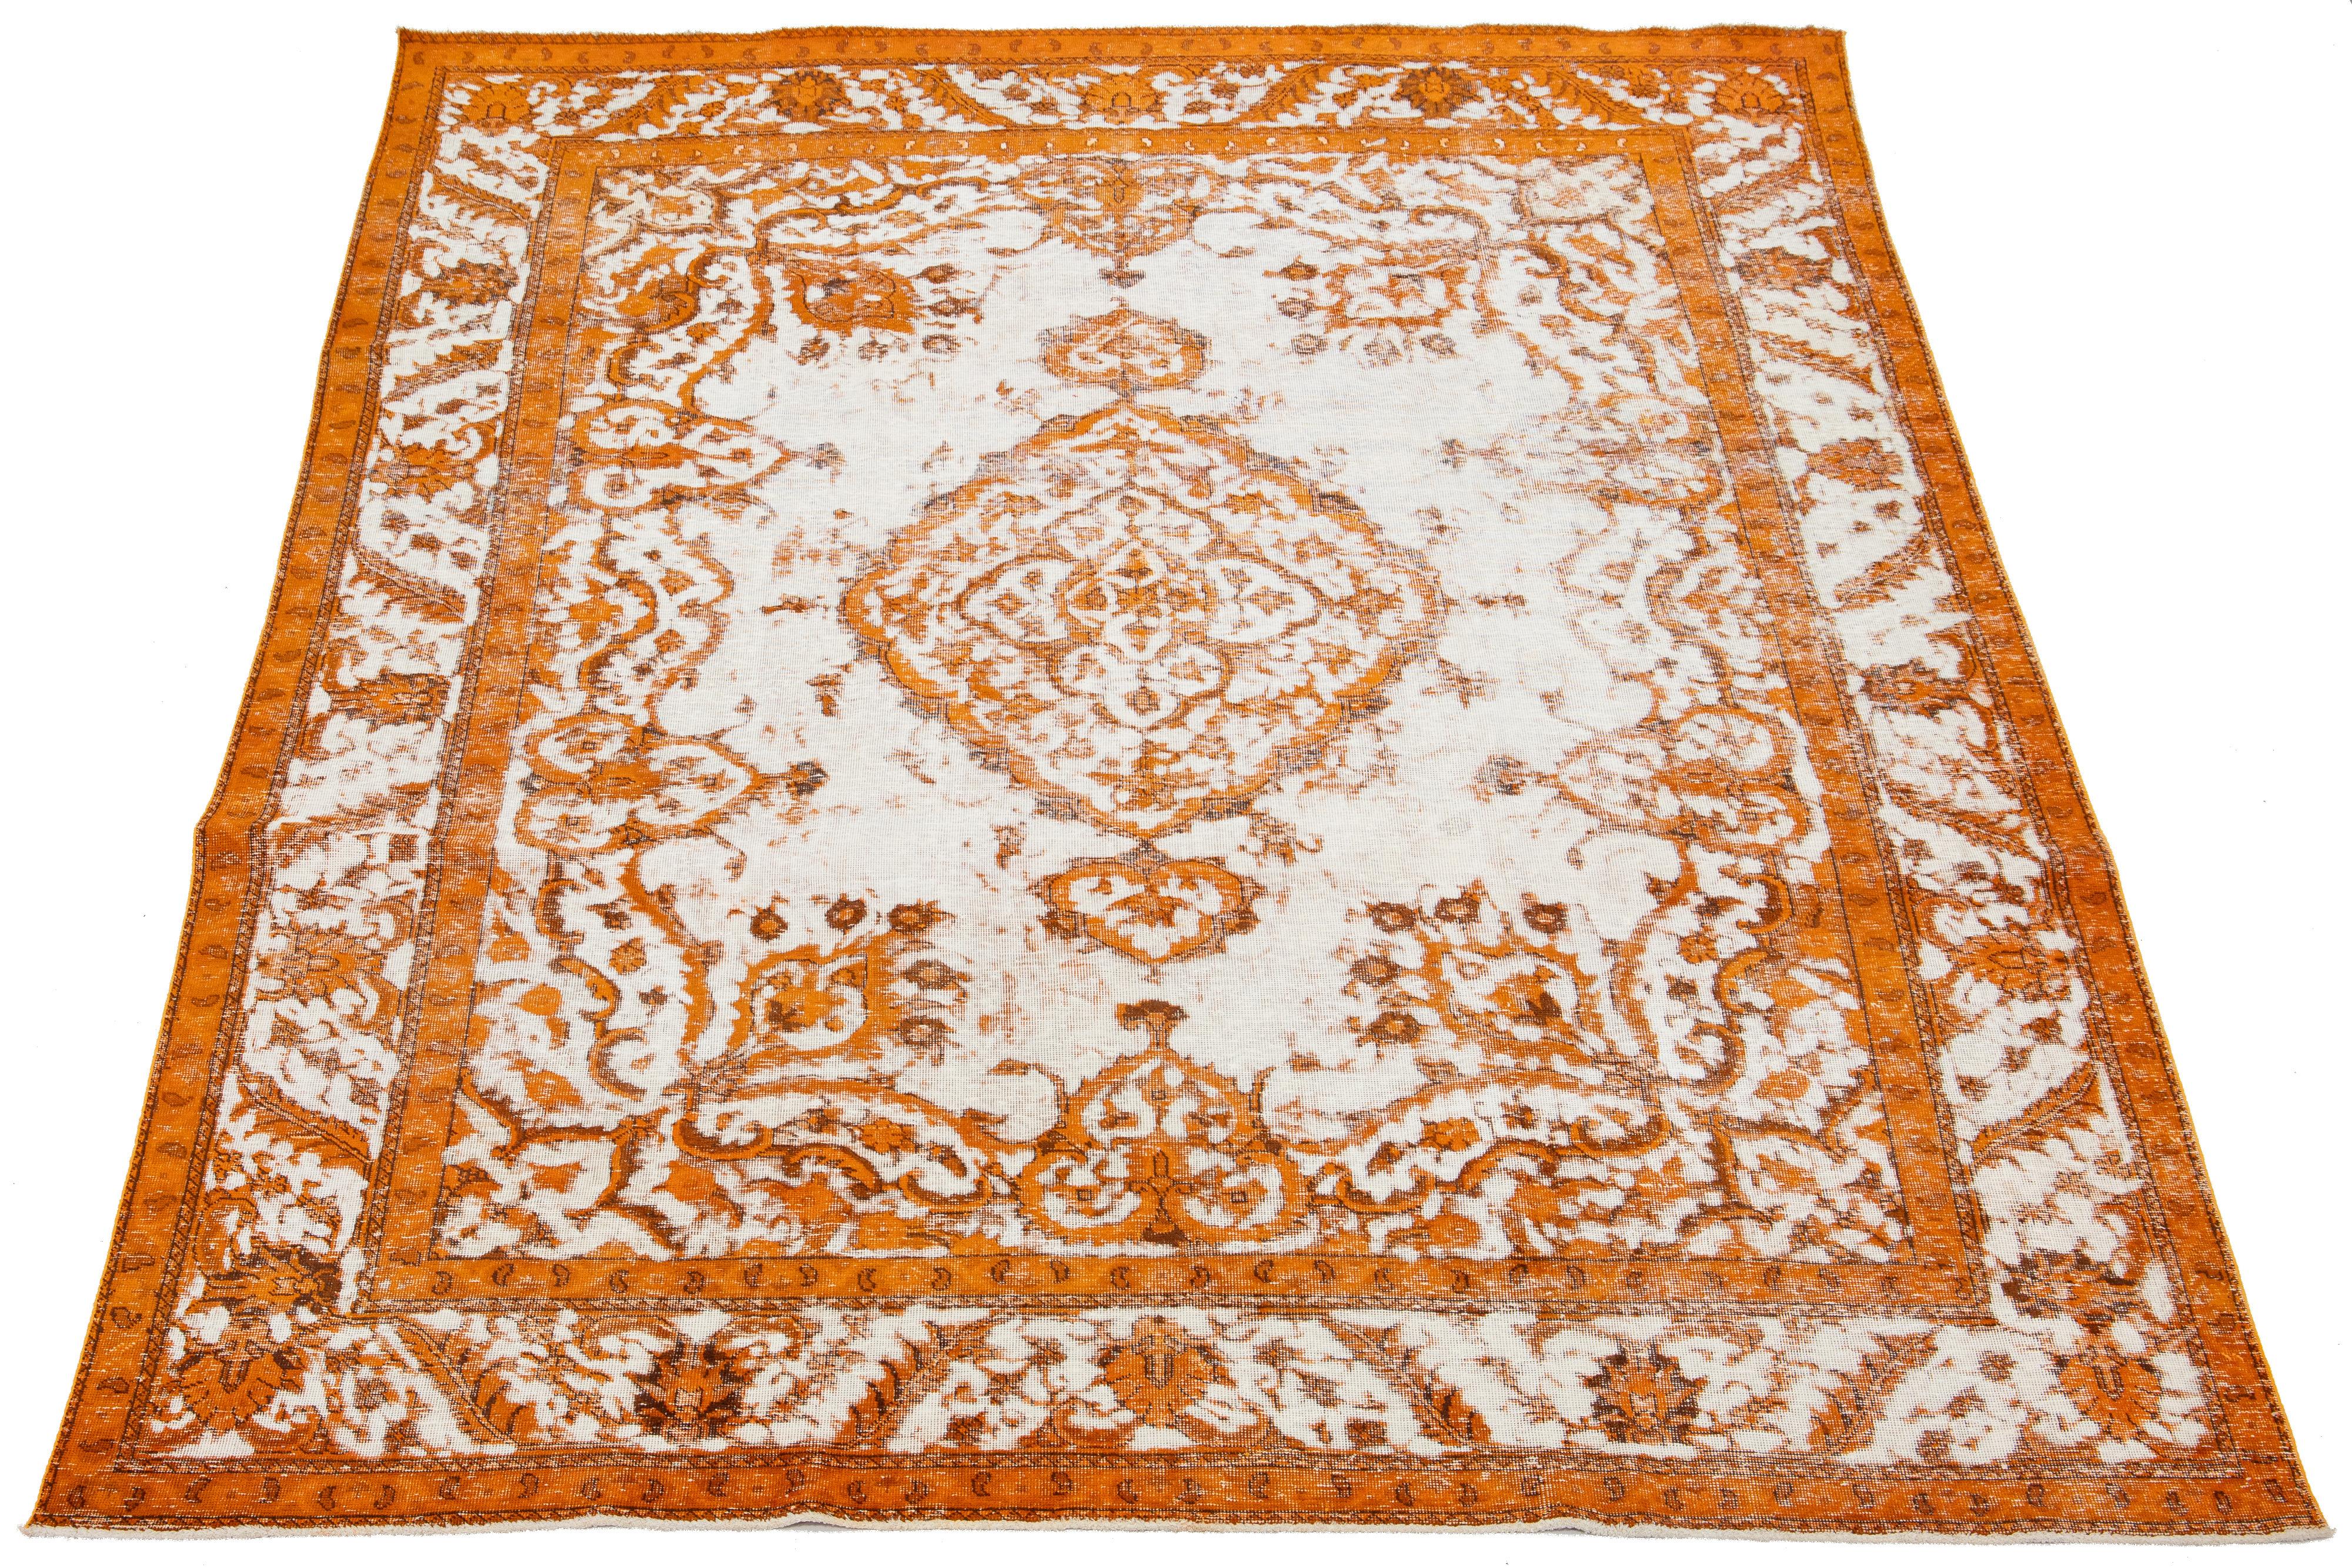 This is a Persian wool rug with an ivory base color, a medallion floral design, and orange accents. It is hand-knotted and has an antique appearance.

This rug measures 9'3'' x 12'2